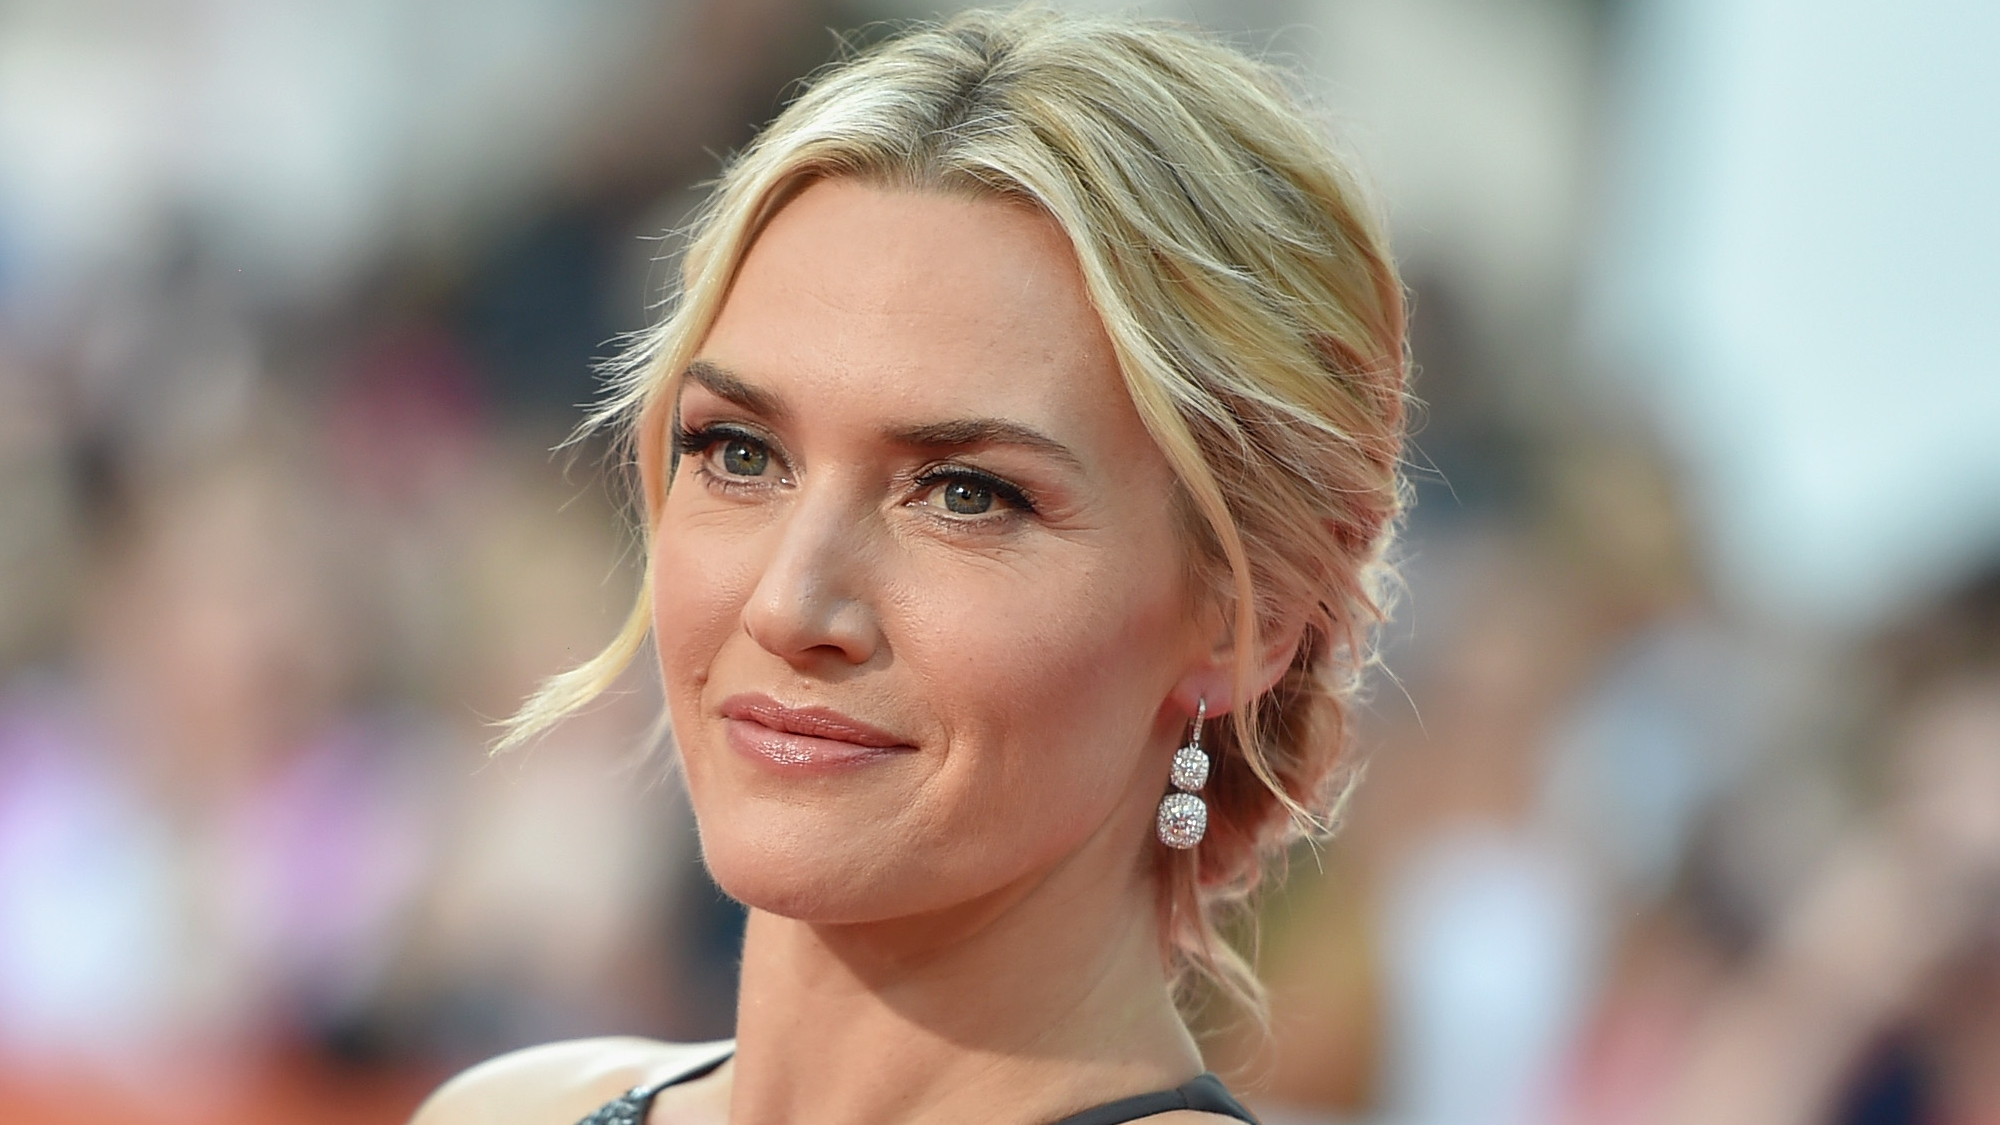 ‘Like A Hot Mess’: Kate Winslet Reflects On Being 47 While Juggling Motherhood And A Career